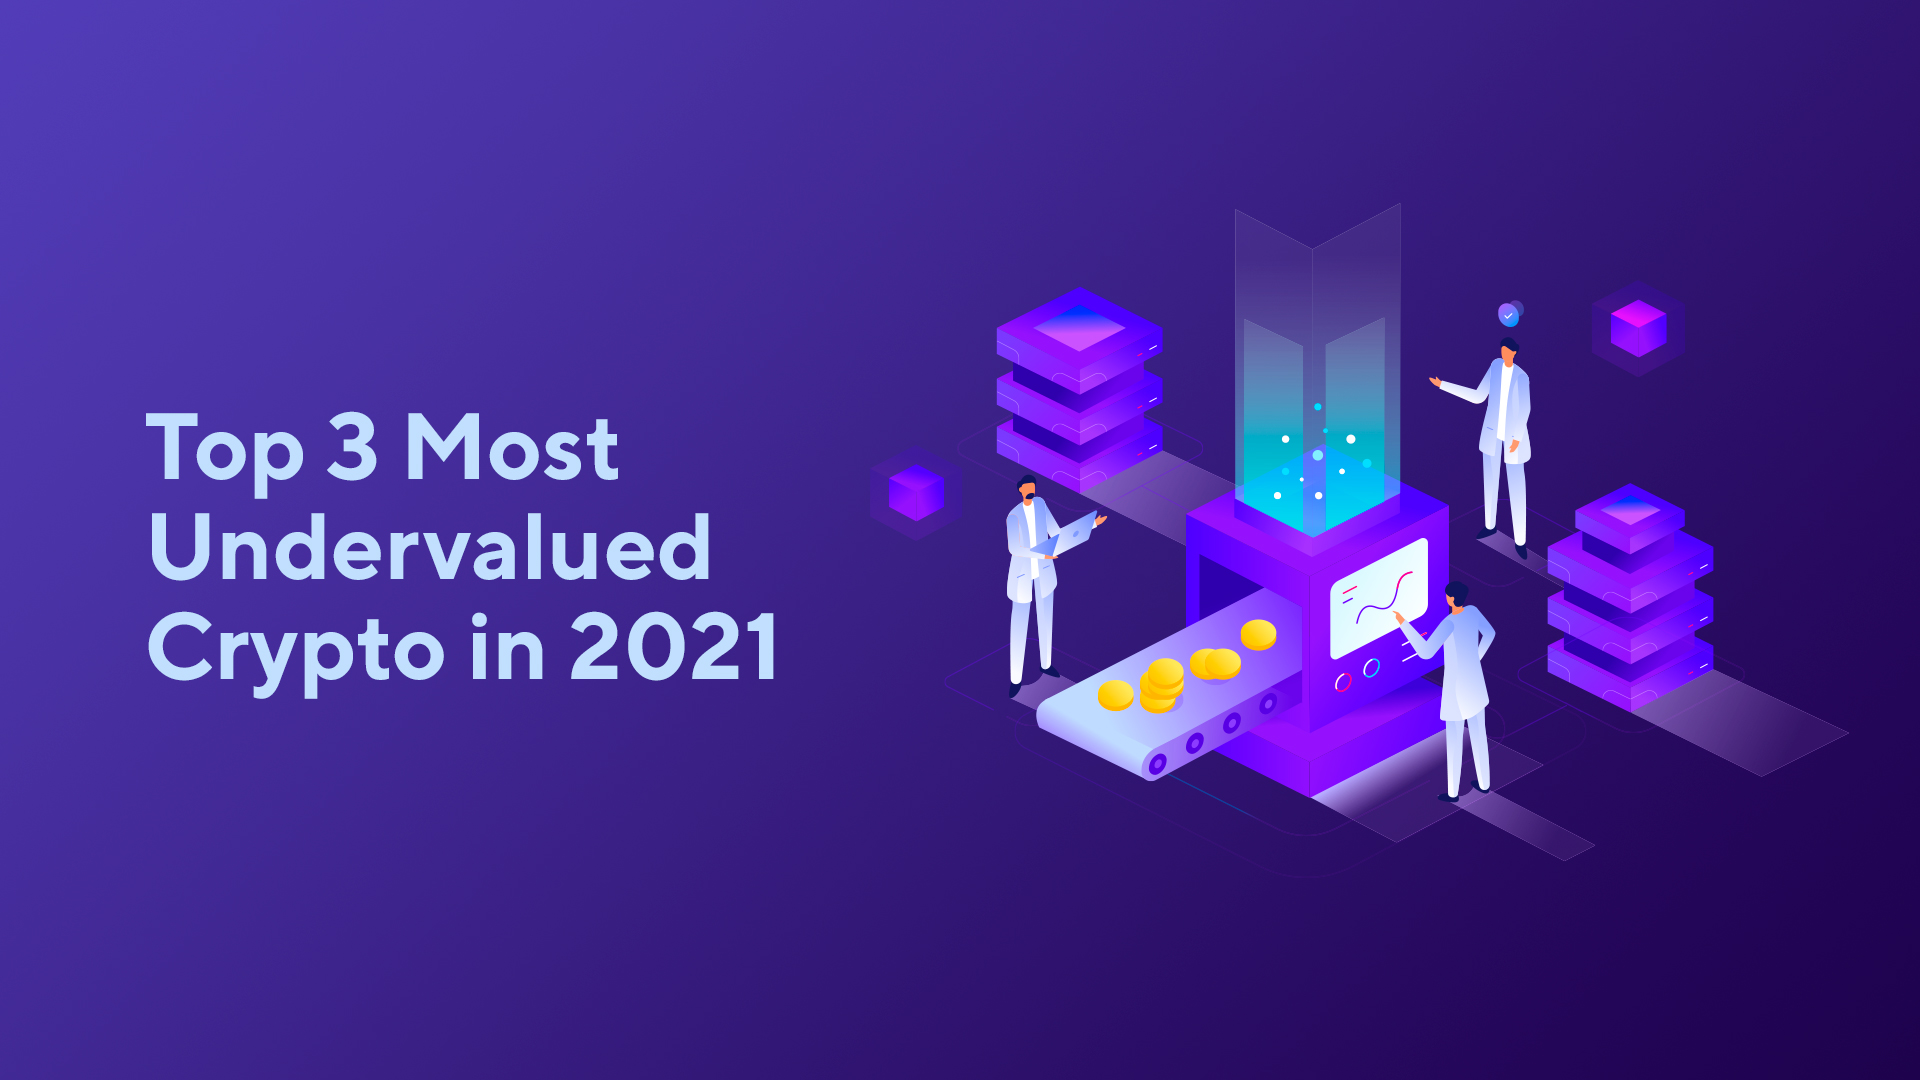 Top 3 Most Undervalued Cryptocurrencies in 2021